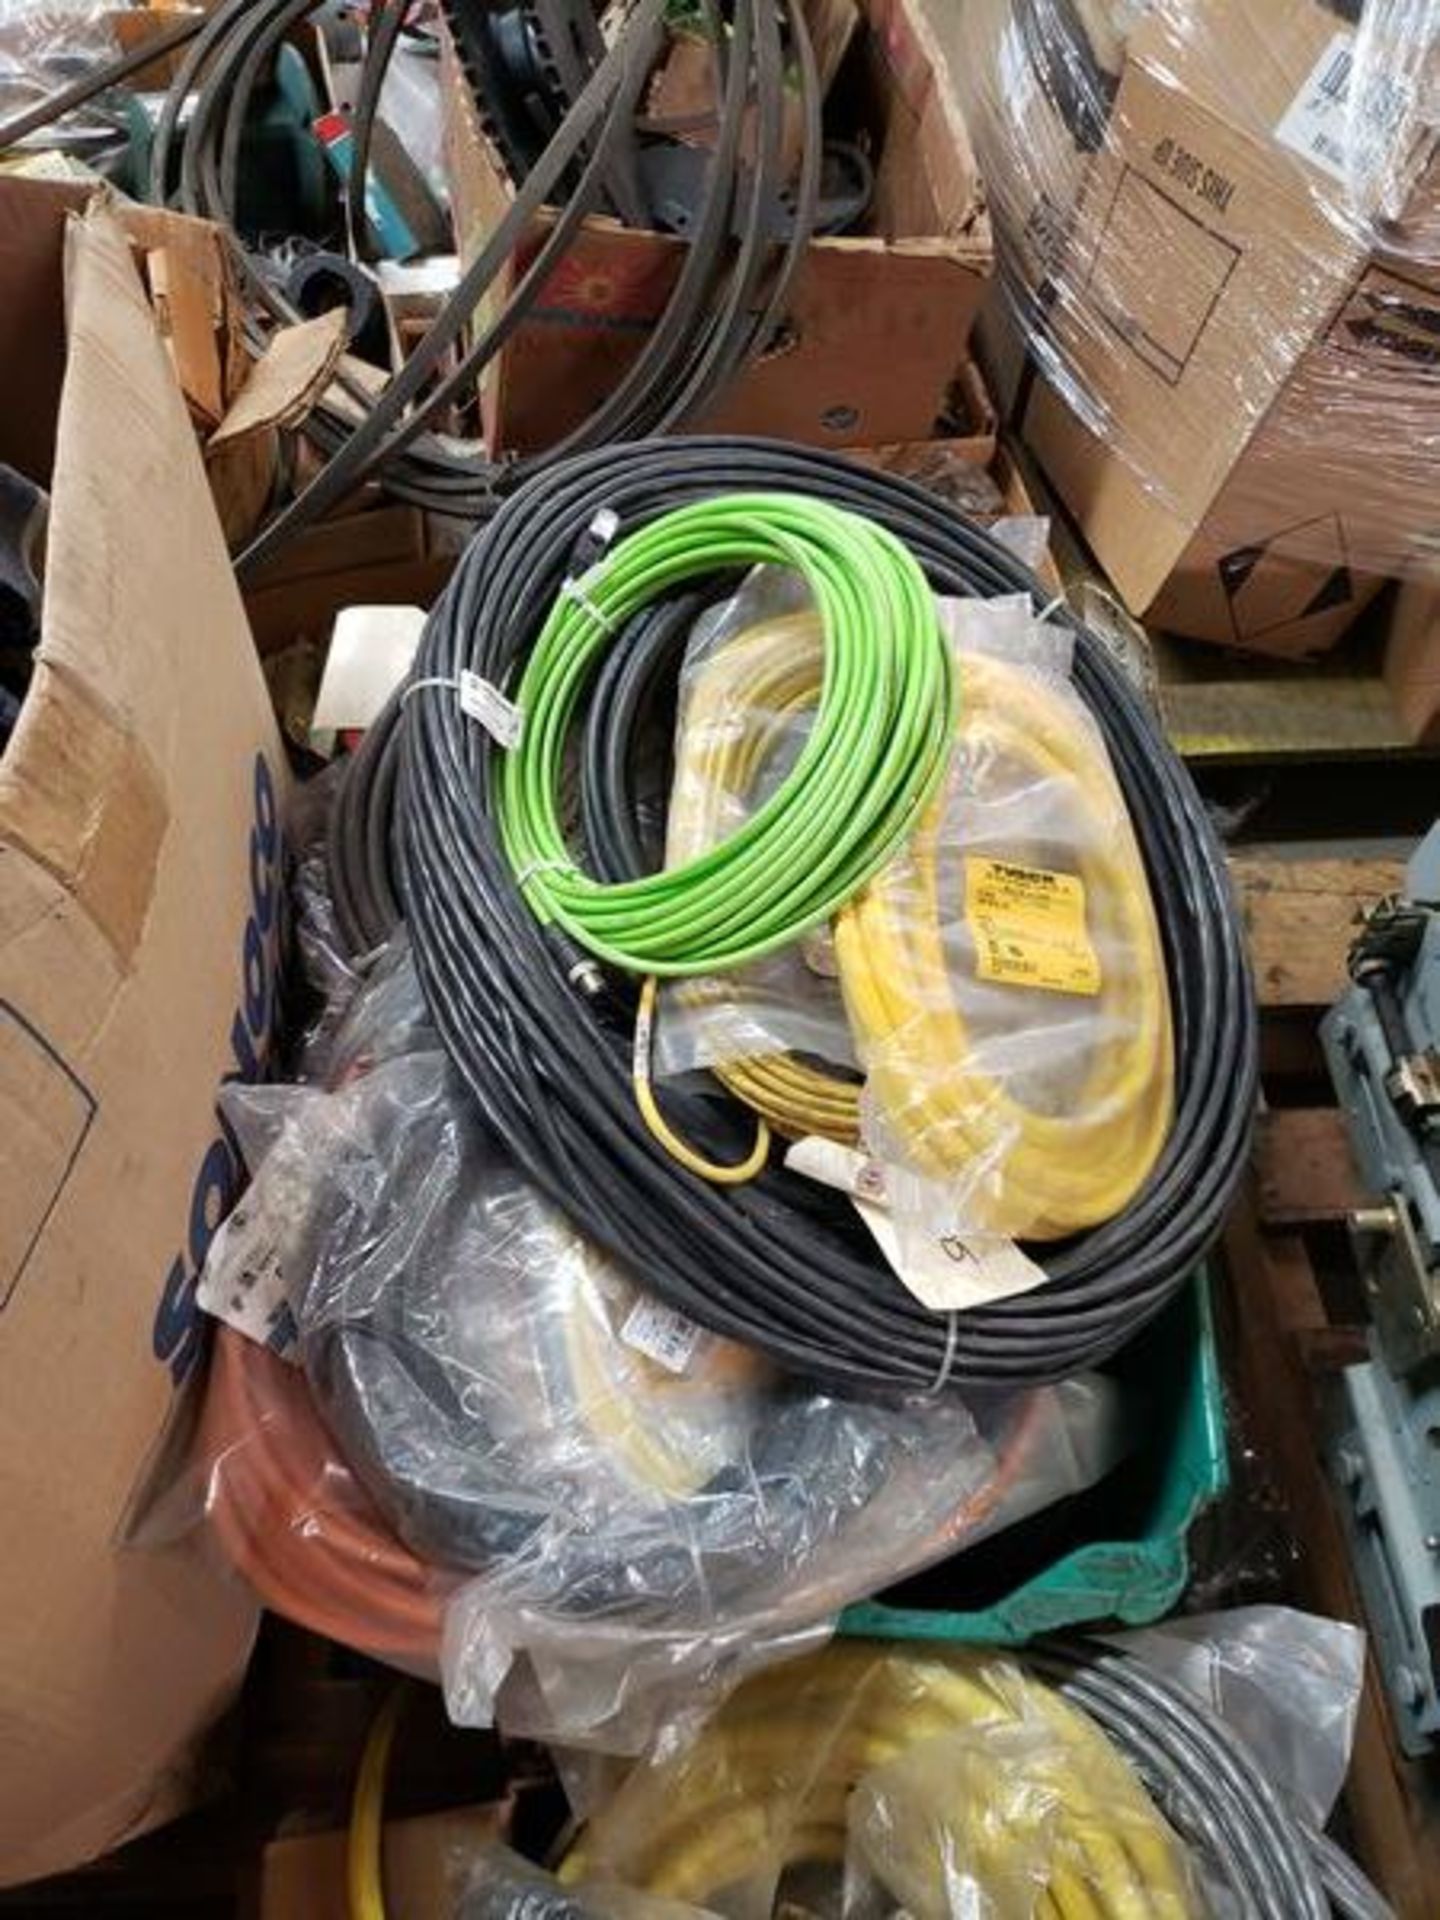 LOT OF CORDS AND CABLE - Image 4 of 4